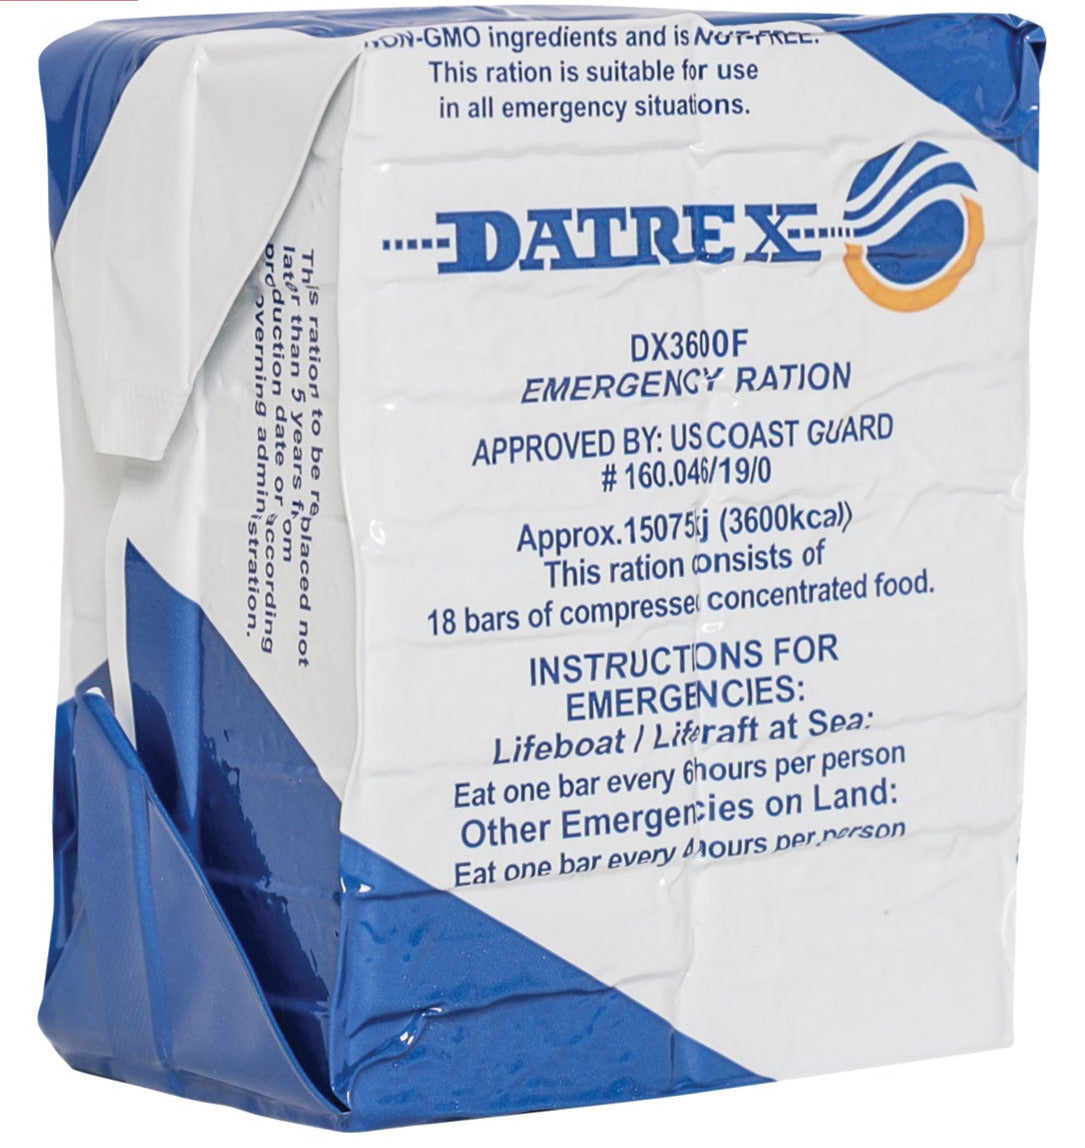 DATREX EMERGENCY RATION BARS MADE IN THE USA